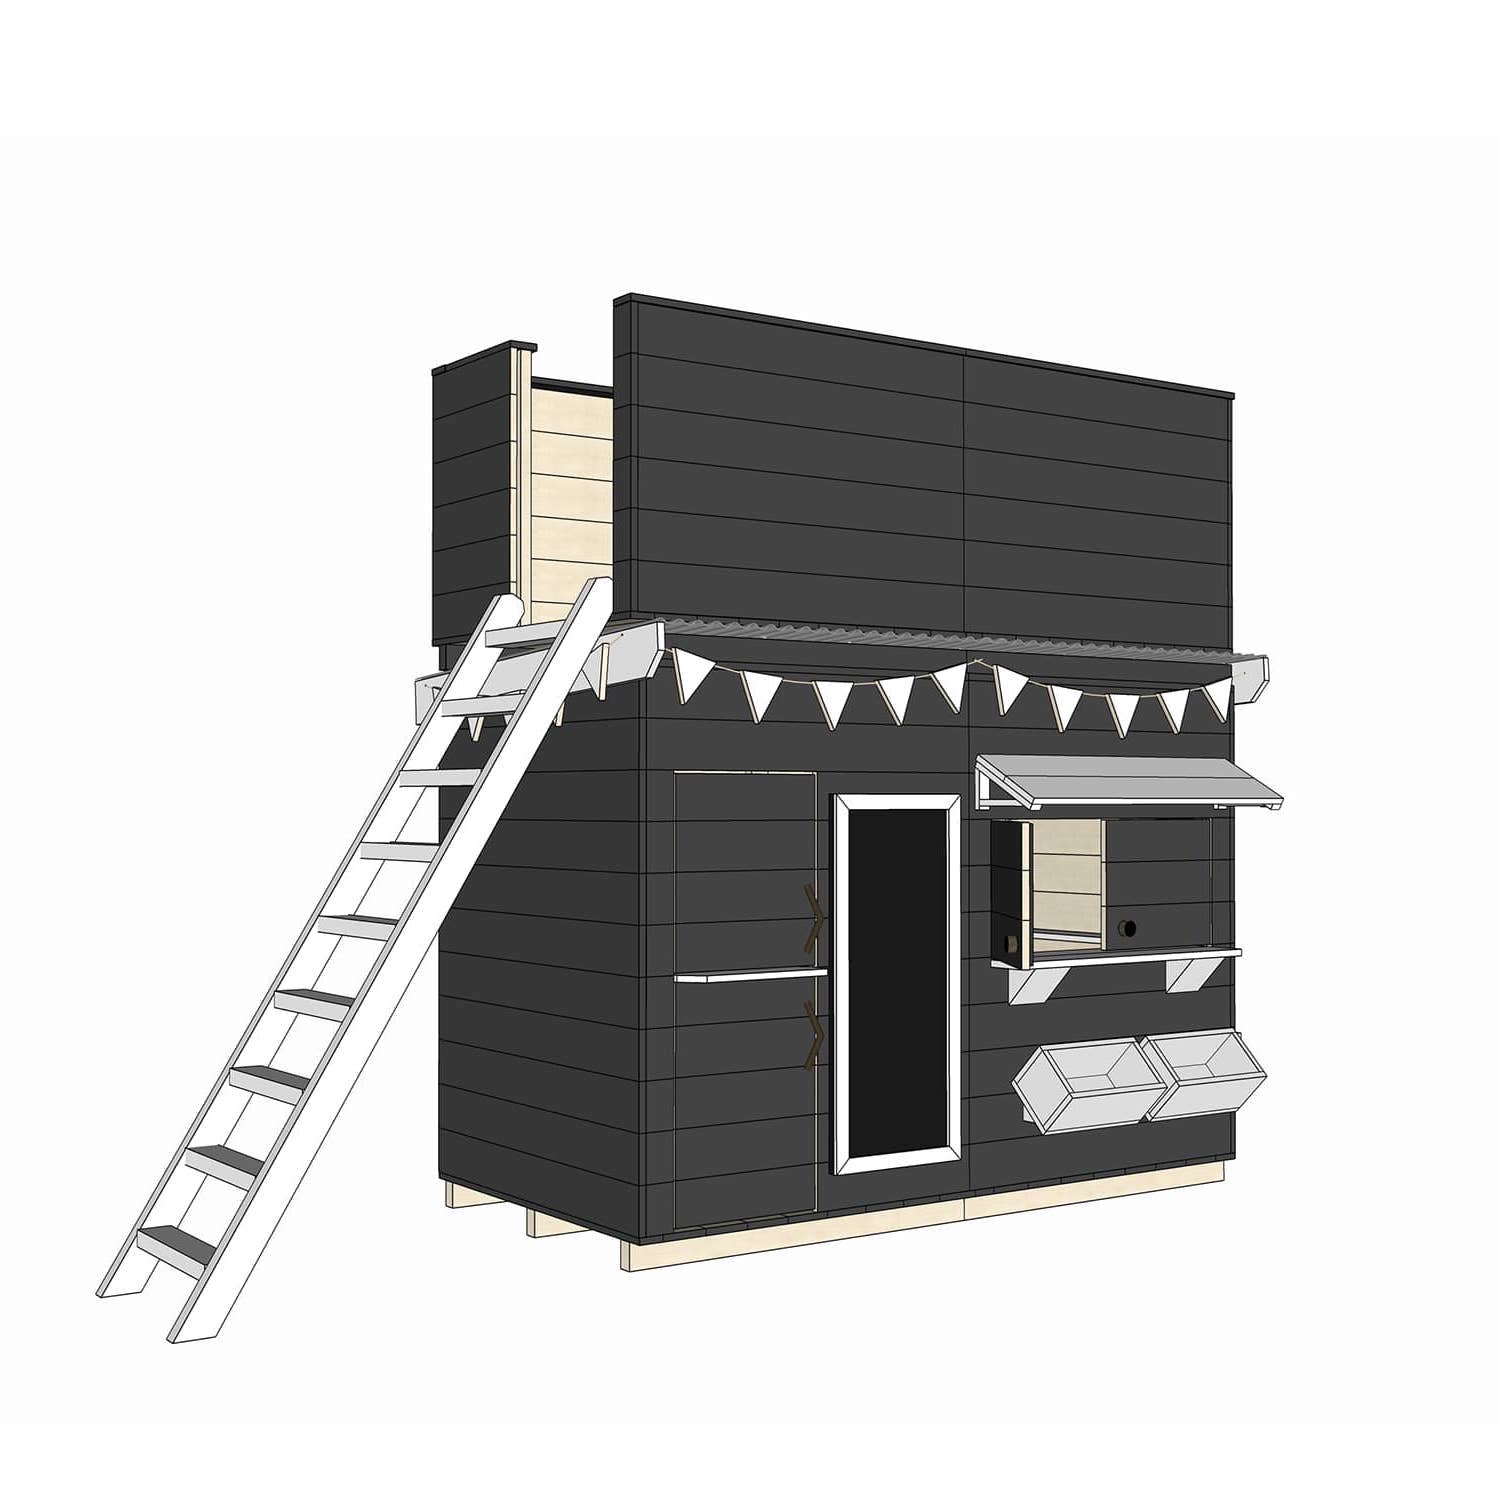 Painted wooden cubby house with double enclosed fort top and accessories in midi rectangle size